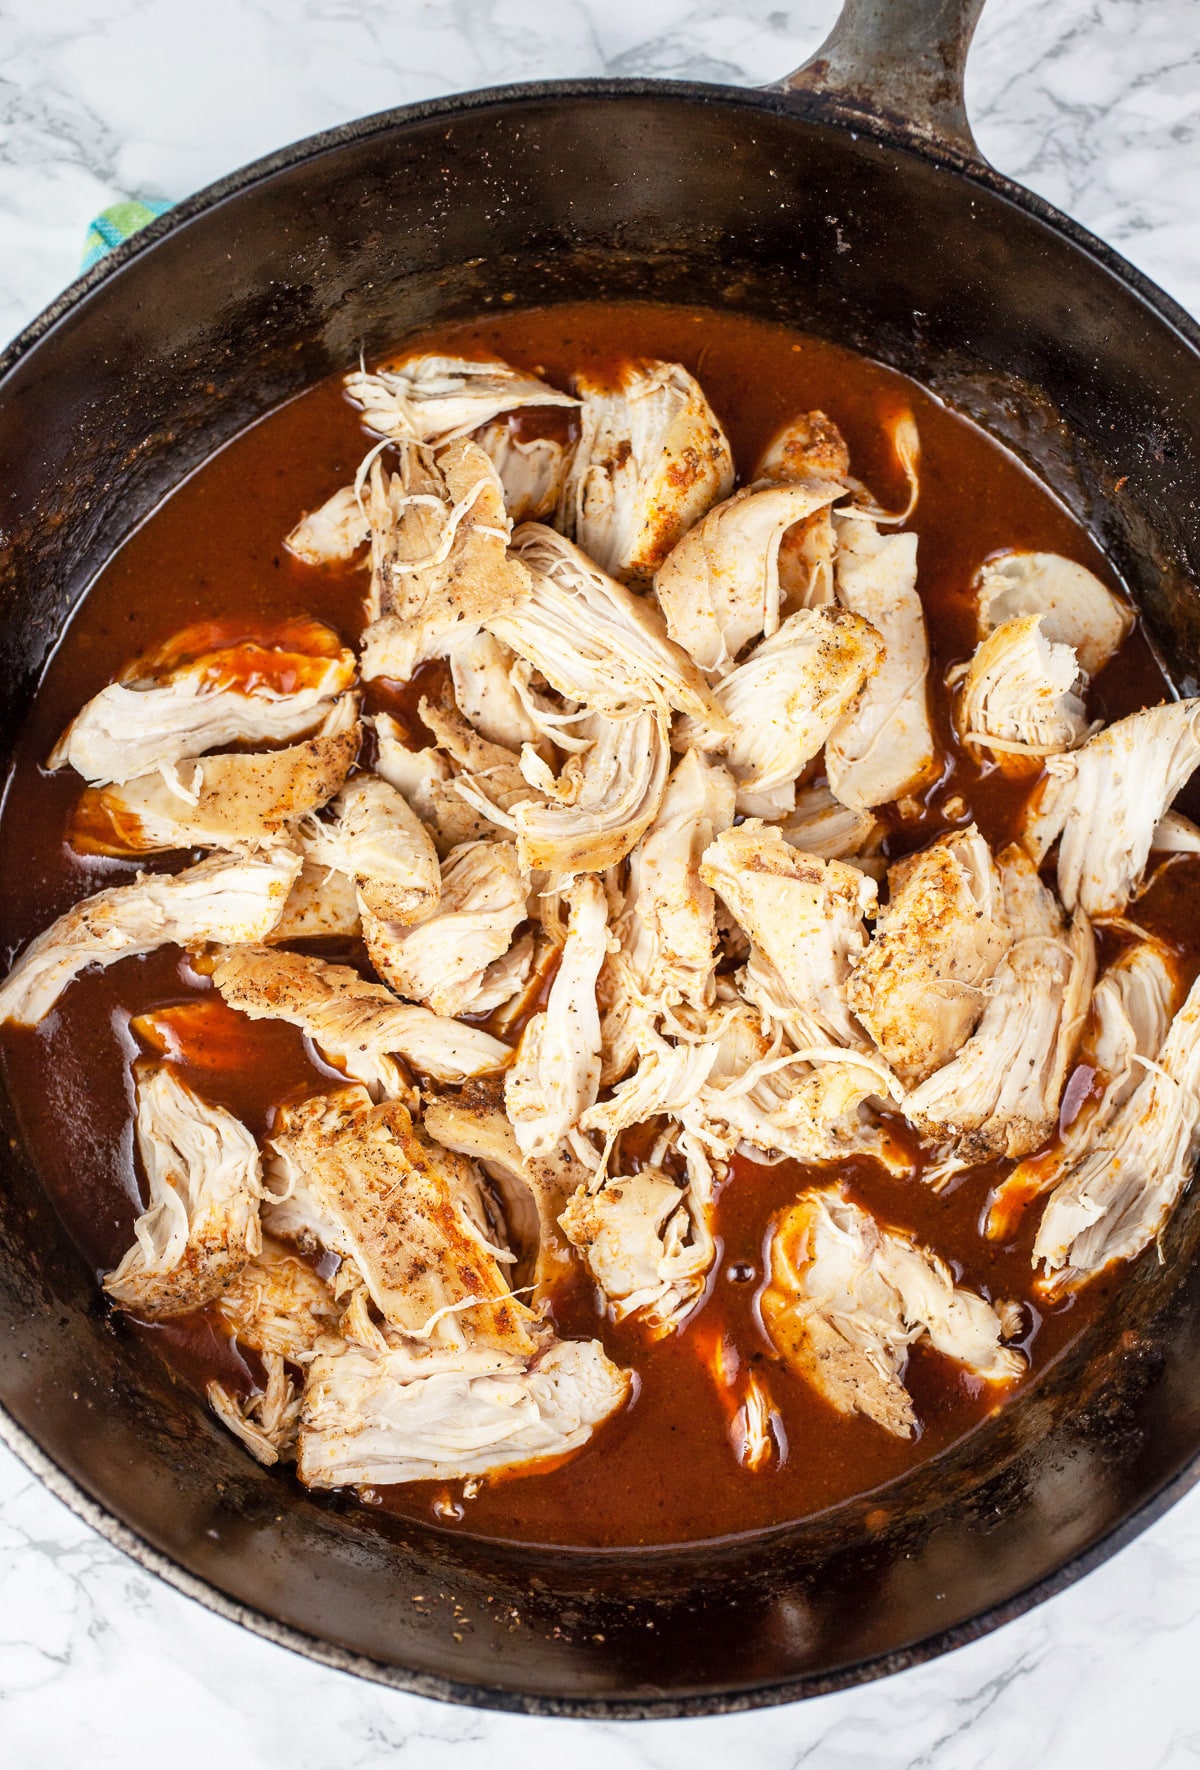 Shredded chicken and BBQ sauce in Dutch oven.